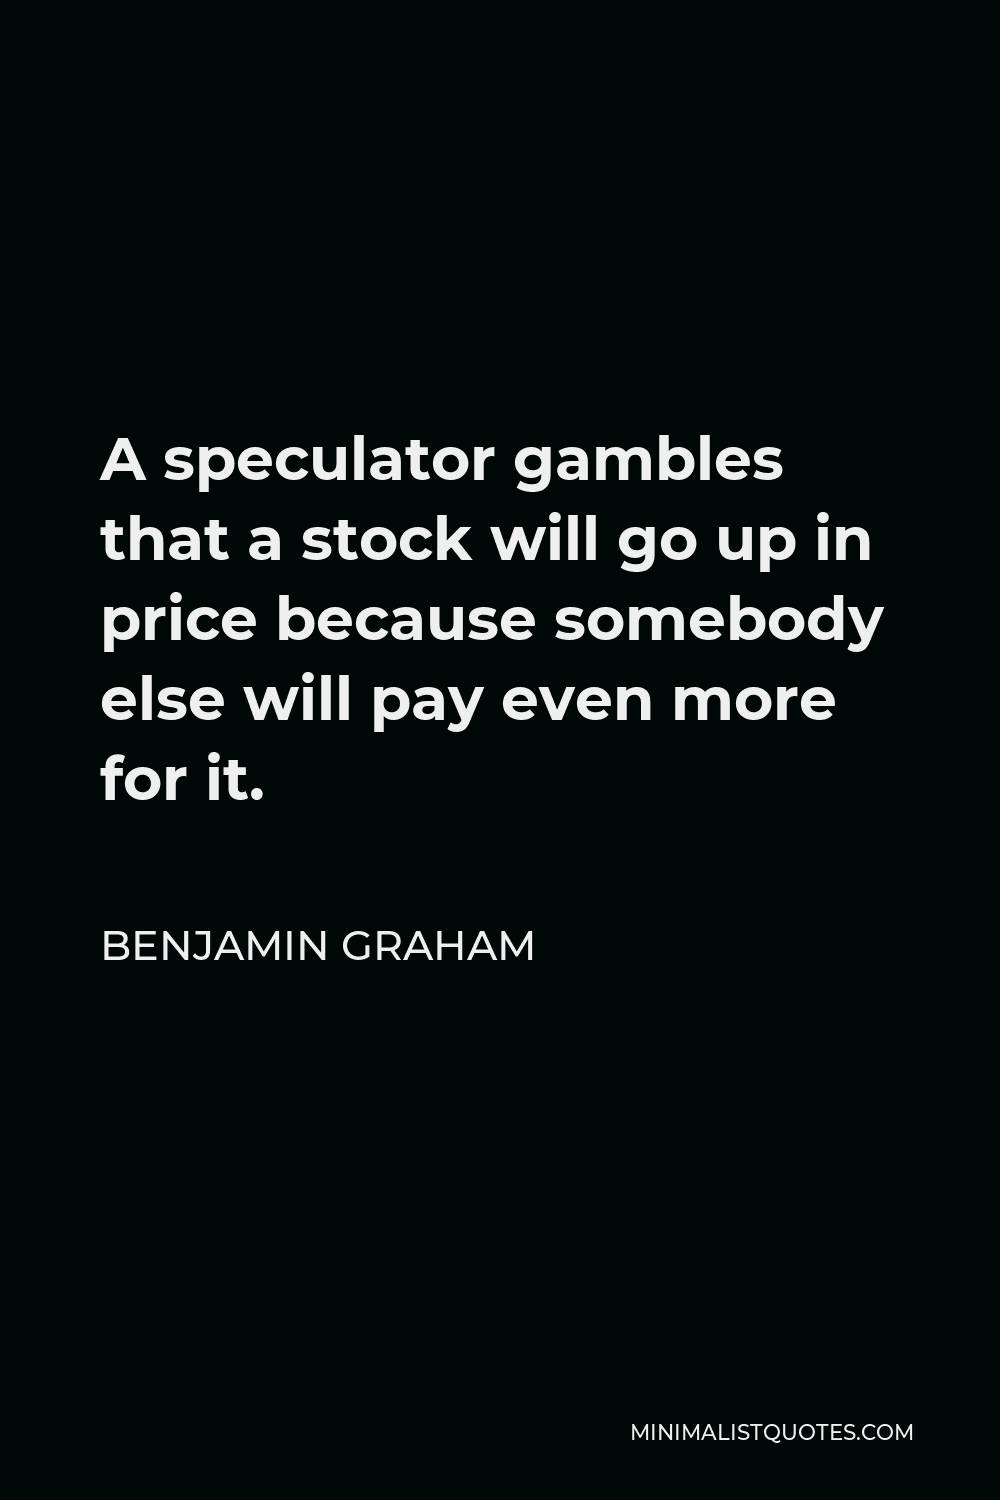 Benjamin Graham Quote - A speculator gambles that a stock will go up in price because somebody else will pay even more for it.